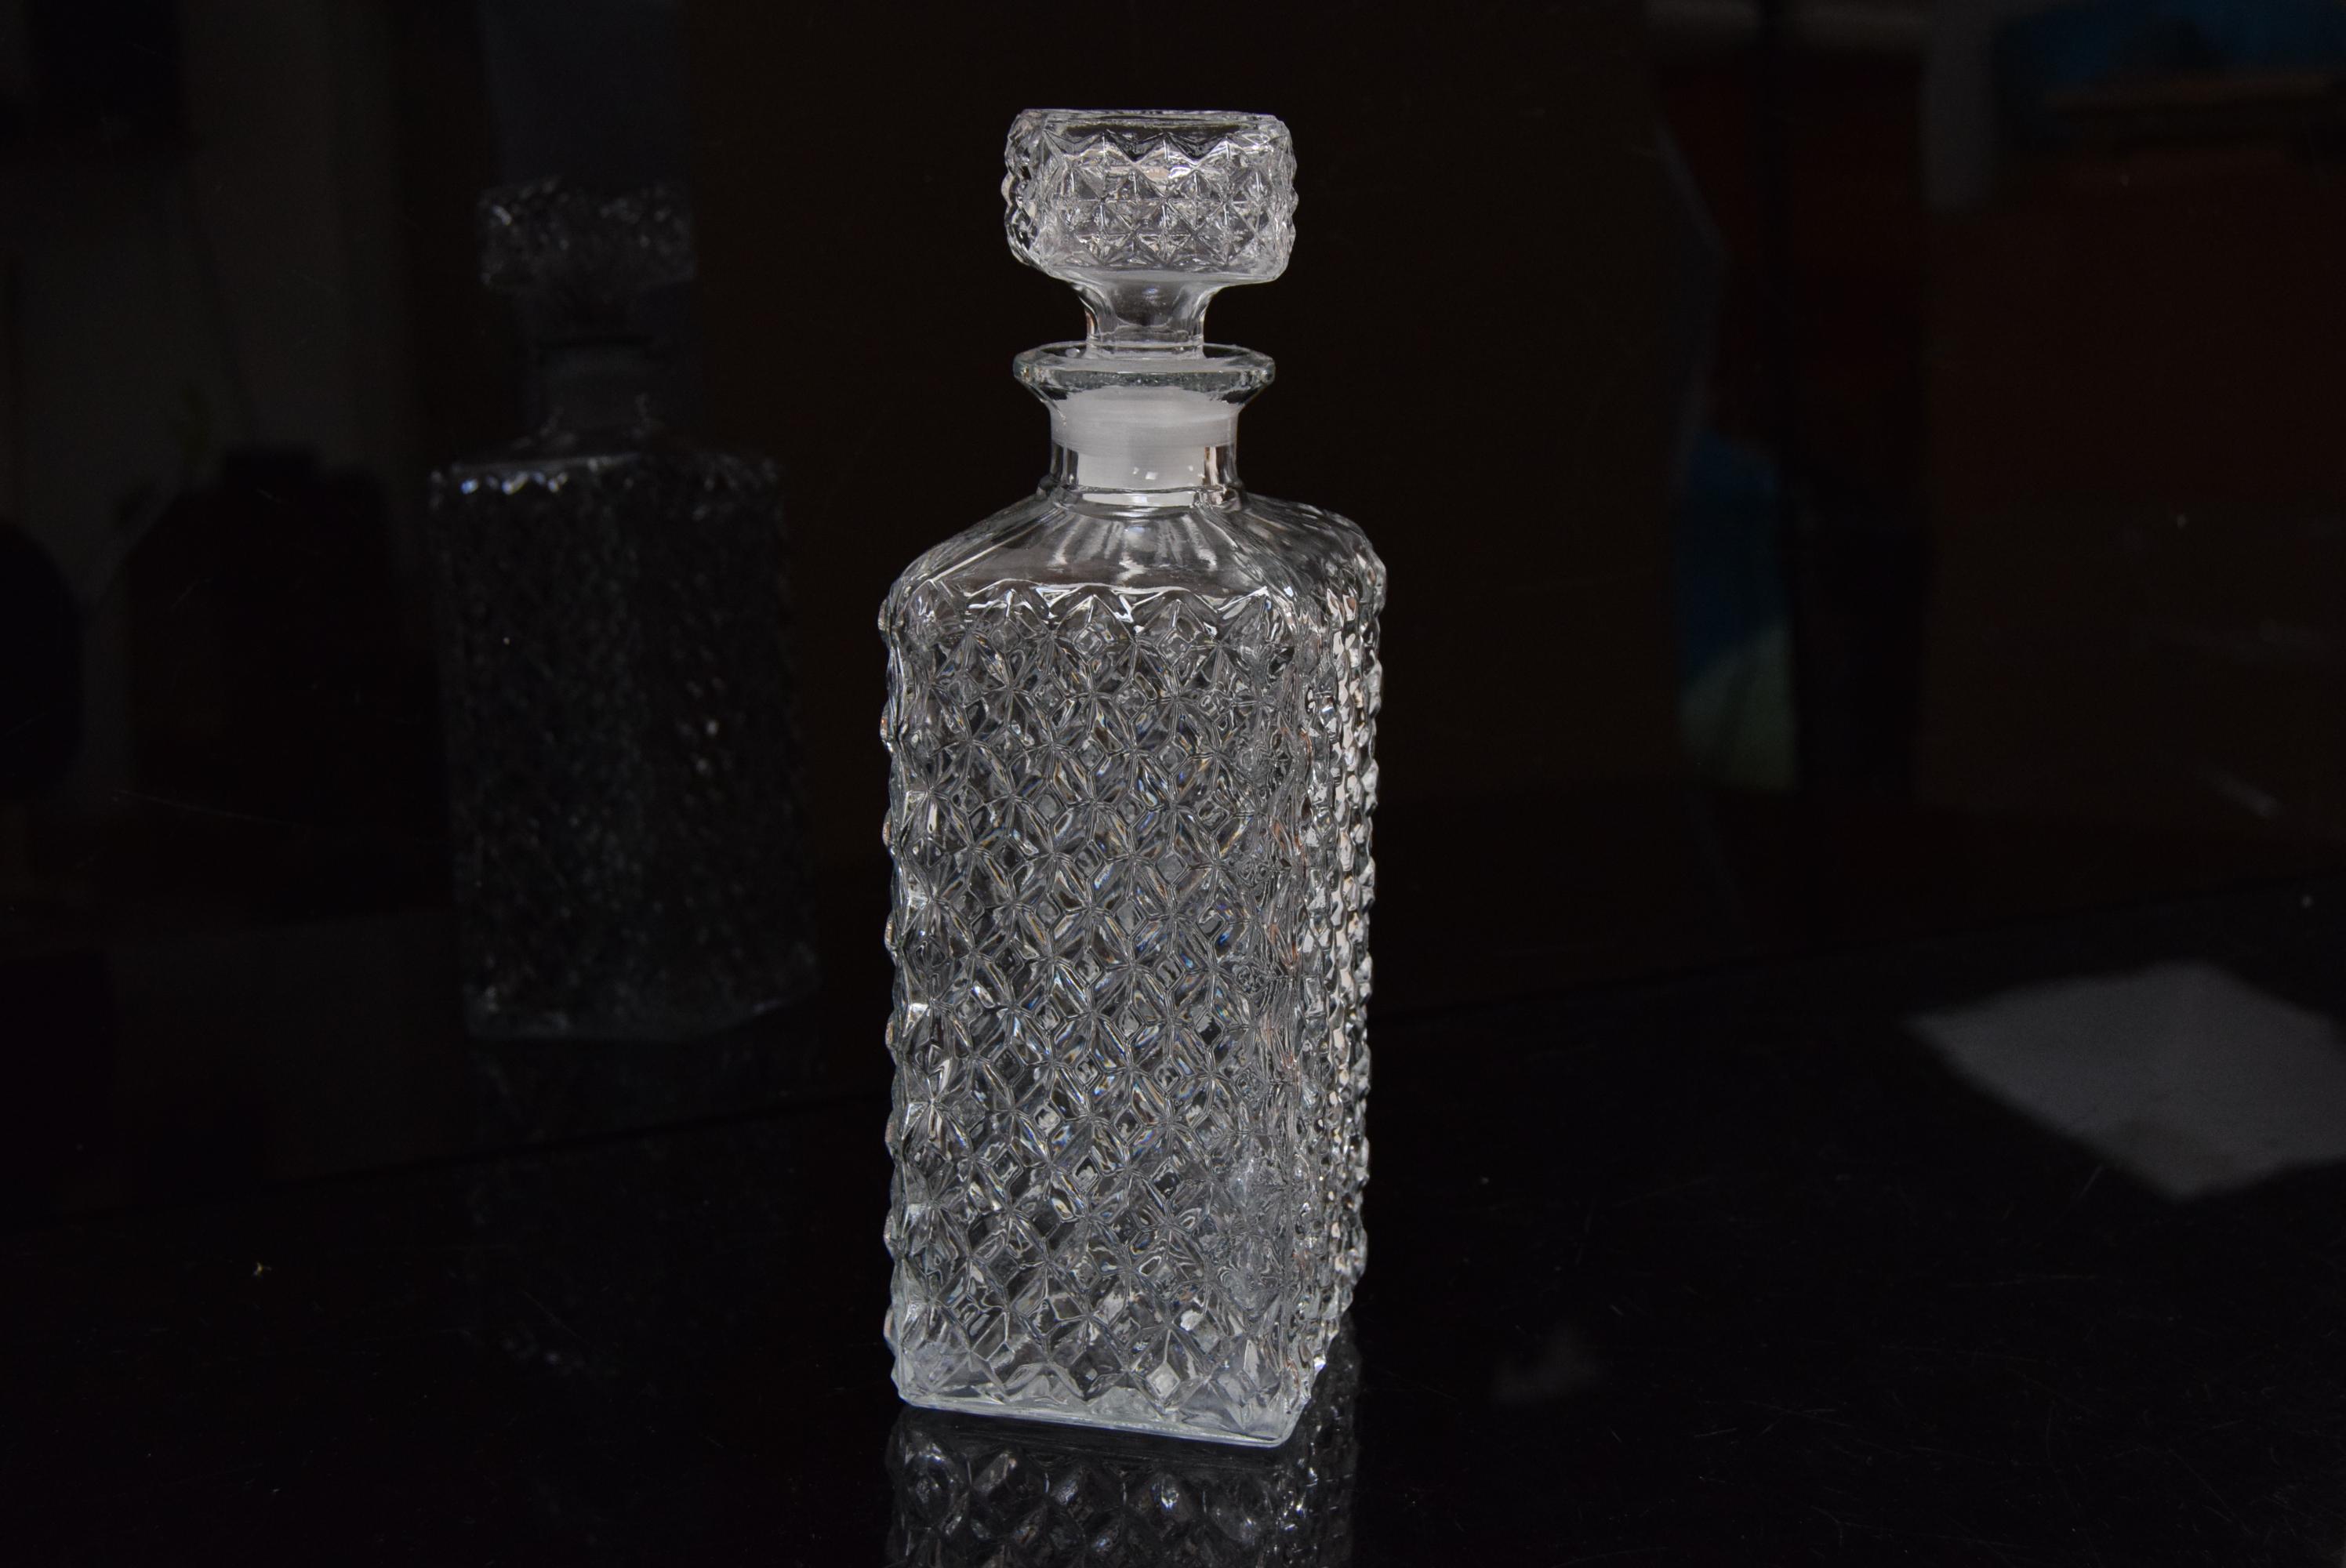 Made in Czechoslovakia
Made of crystal glass
Re-polished
Good original condition.